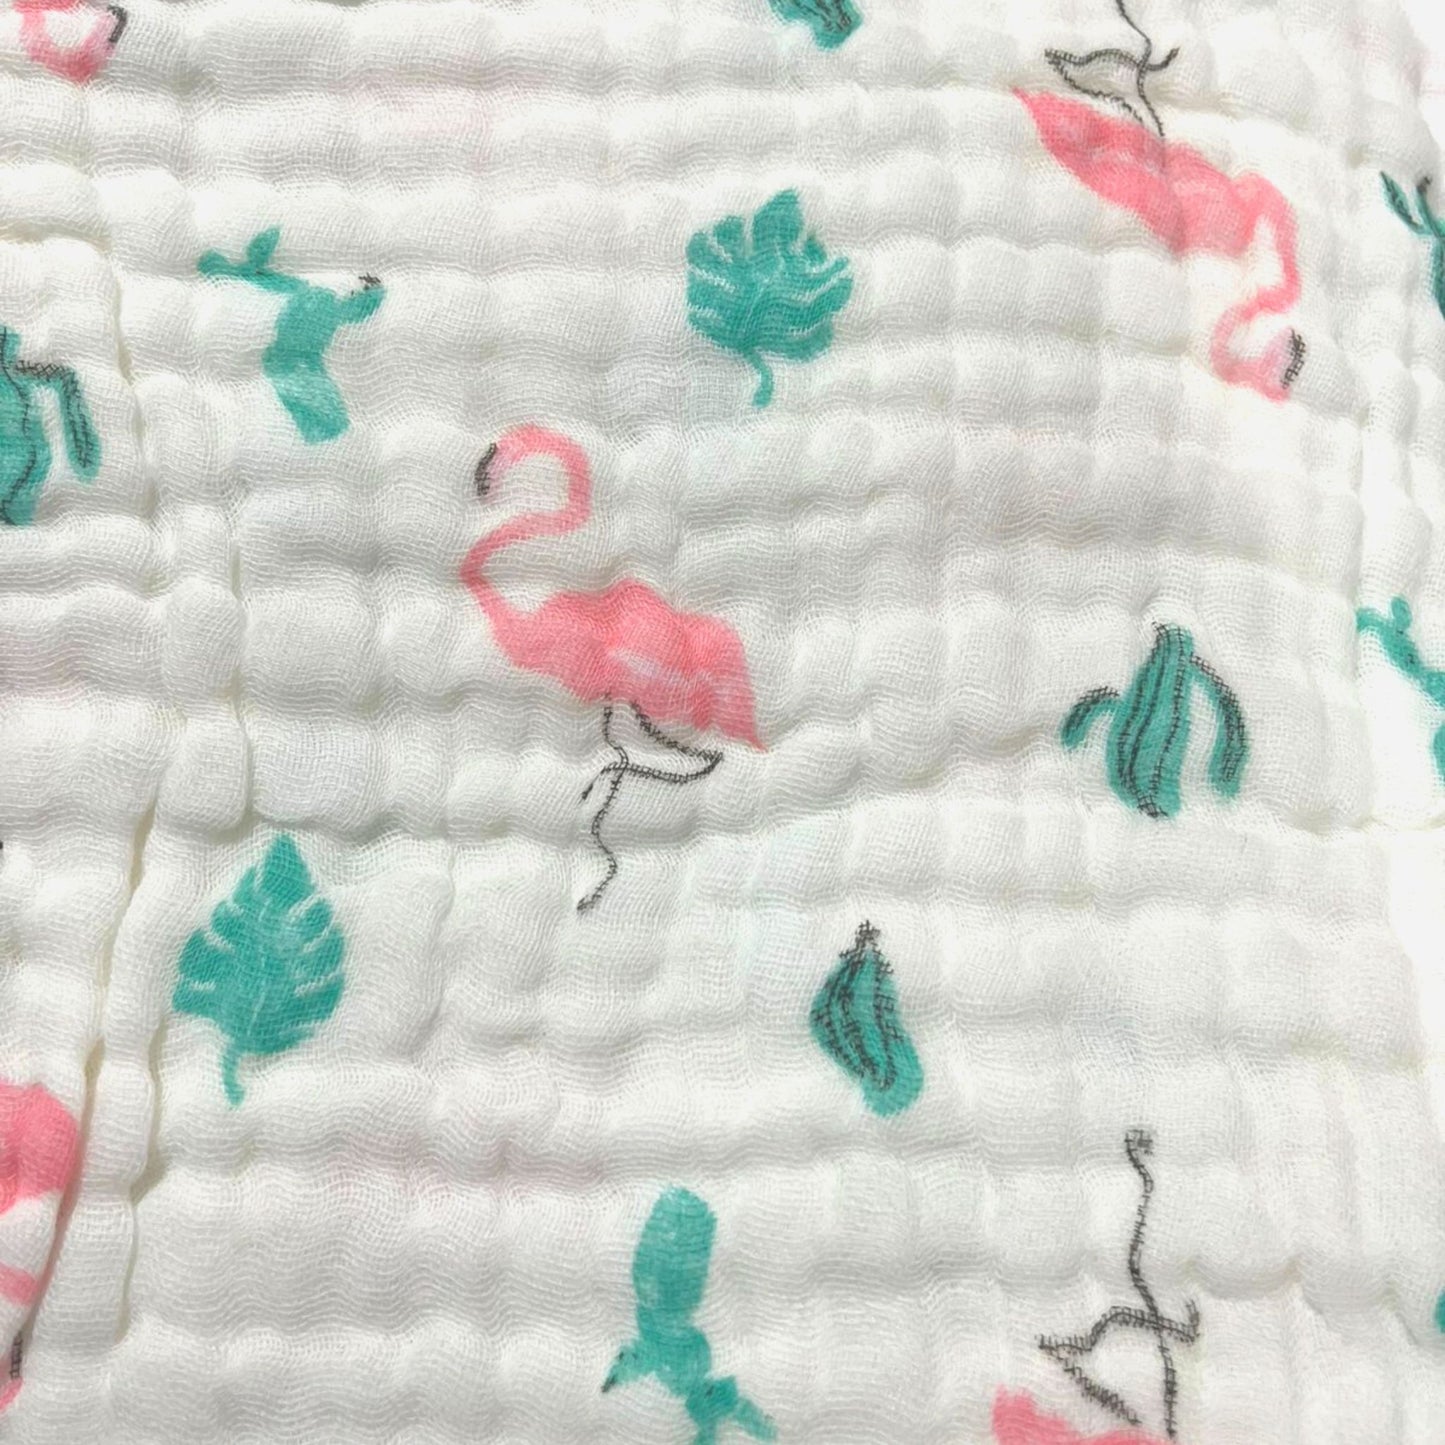 6 Layered Printed Cotton Gauze Baby Blanket/Towel 105x105cm - Collection V